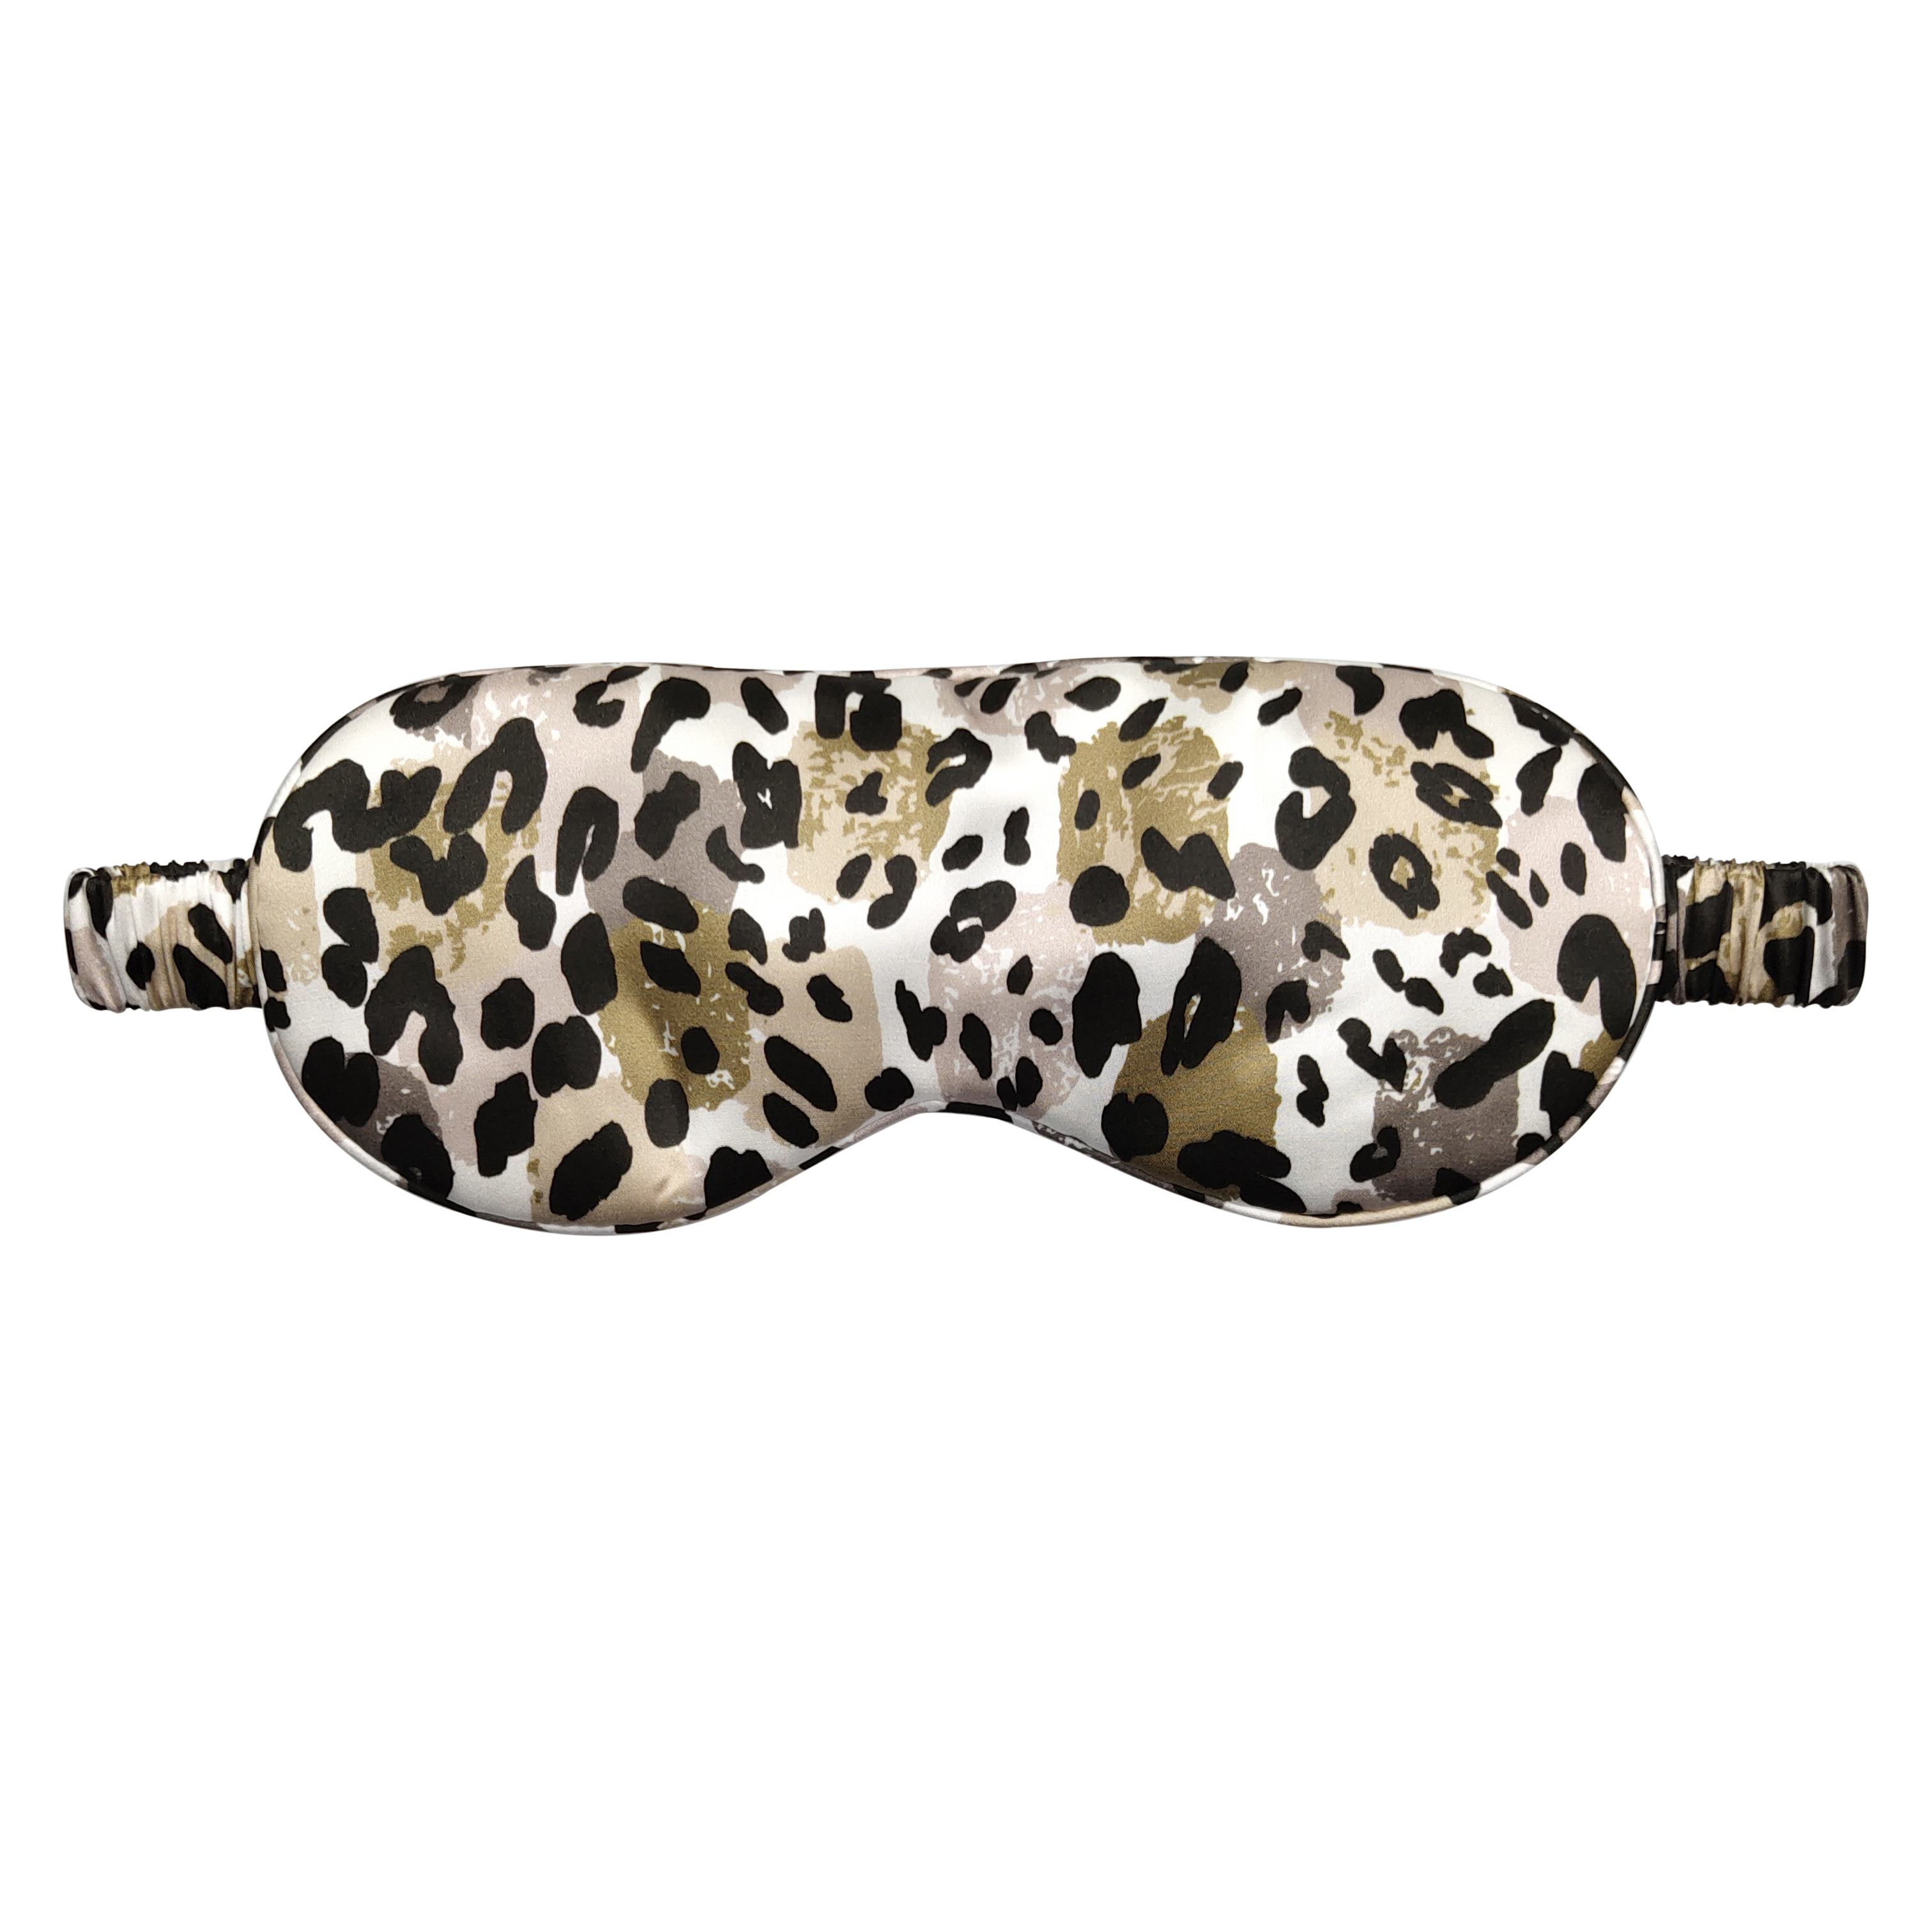 Private Label Leopard Pattern Travel Eye Cover Blindfold for Sleeping Blocking Out Lights